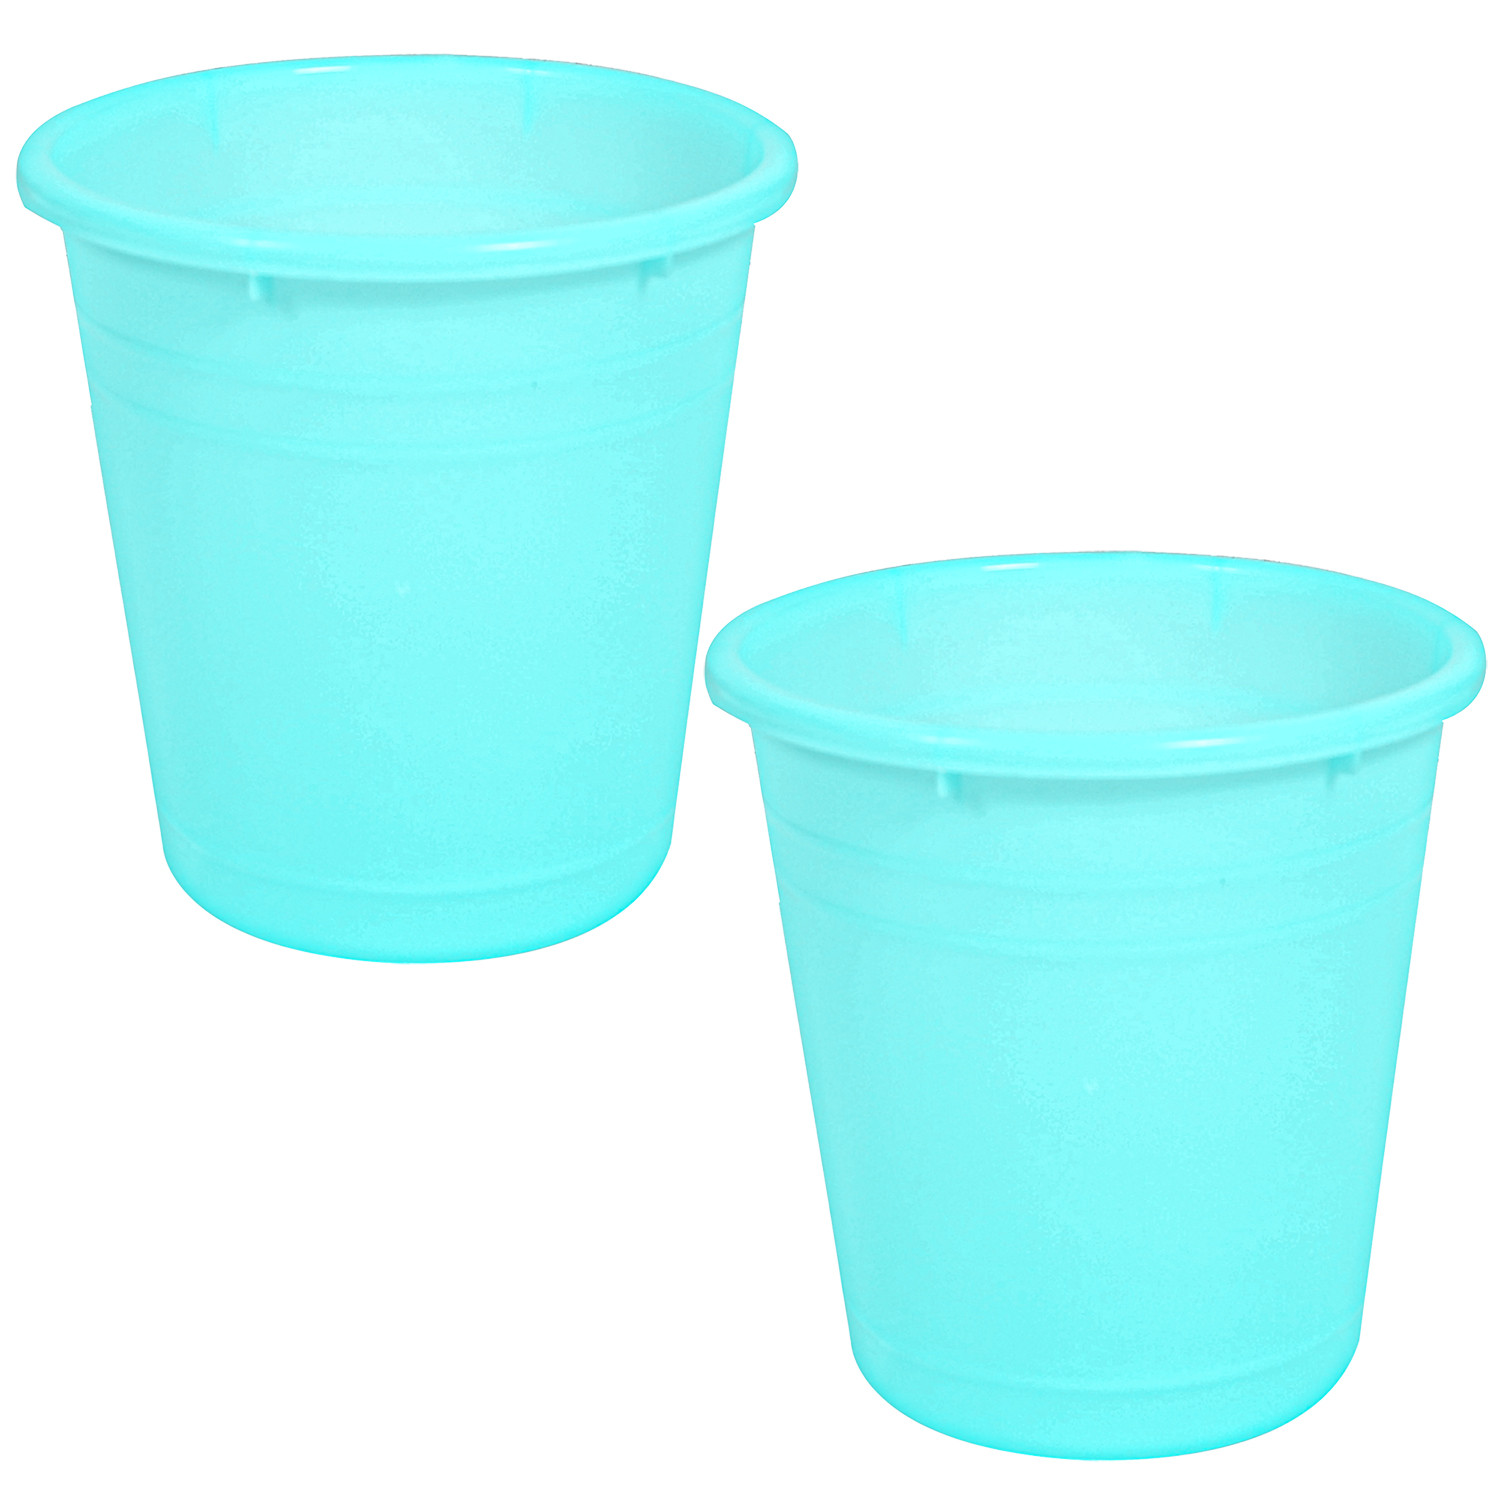 Kuber Industries Plastic Dustbin|Portable Garbage Basket & Round Trash Can for Home,Kitchen,Office,College,7 Ltr.(Mint Green)